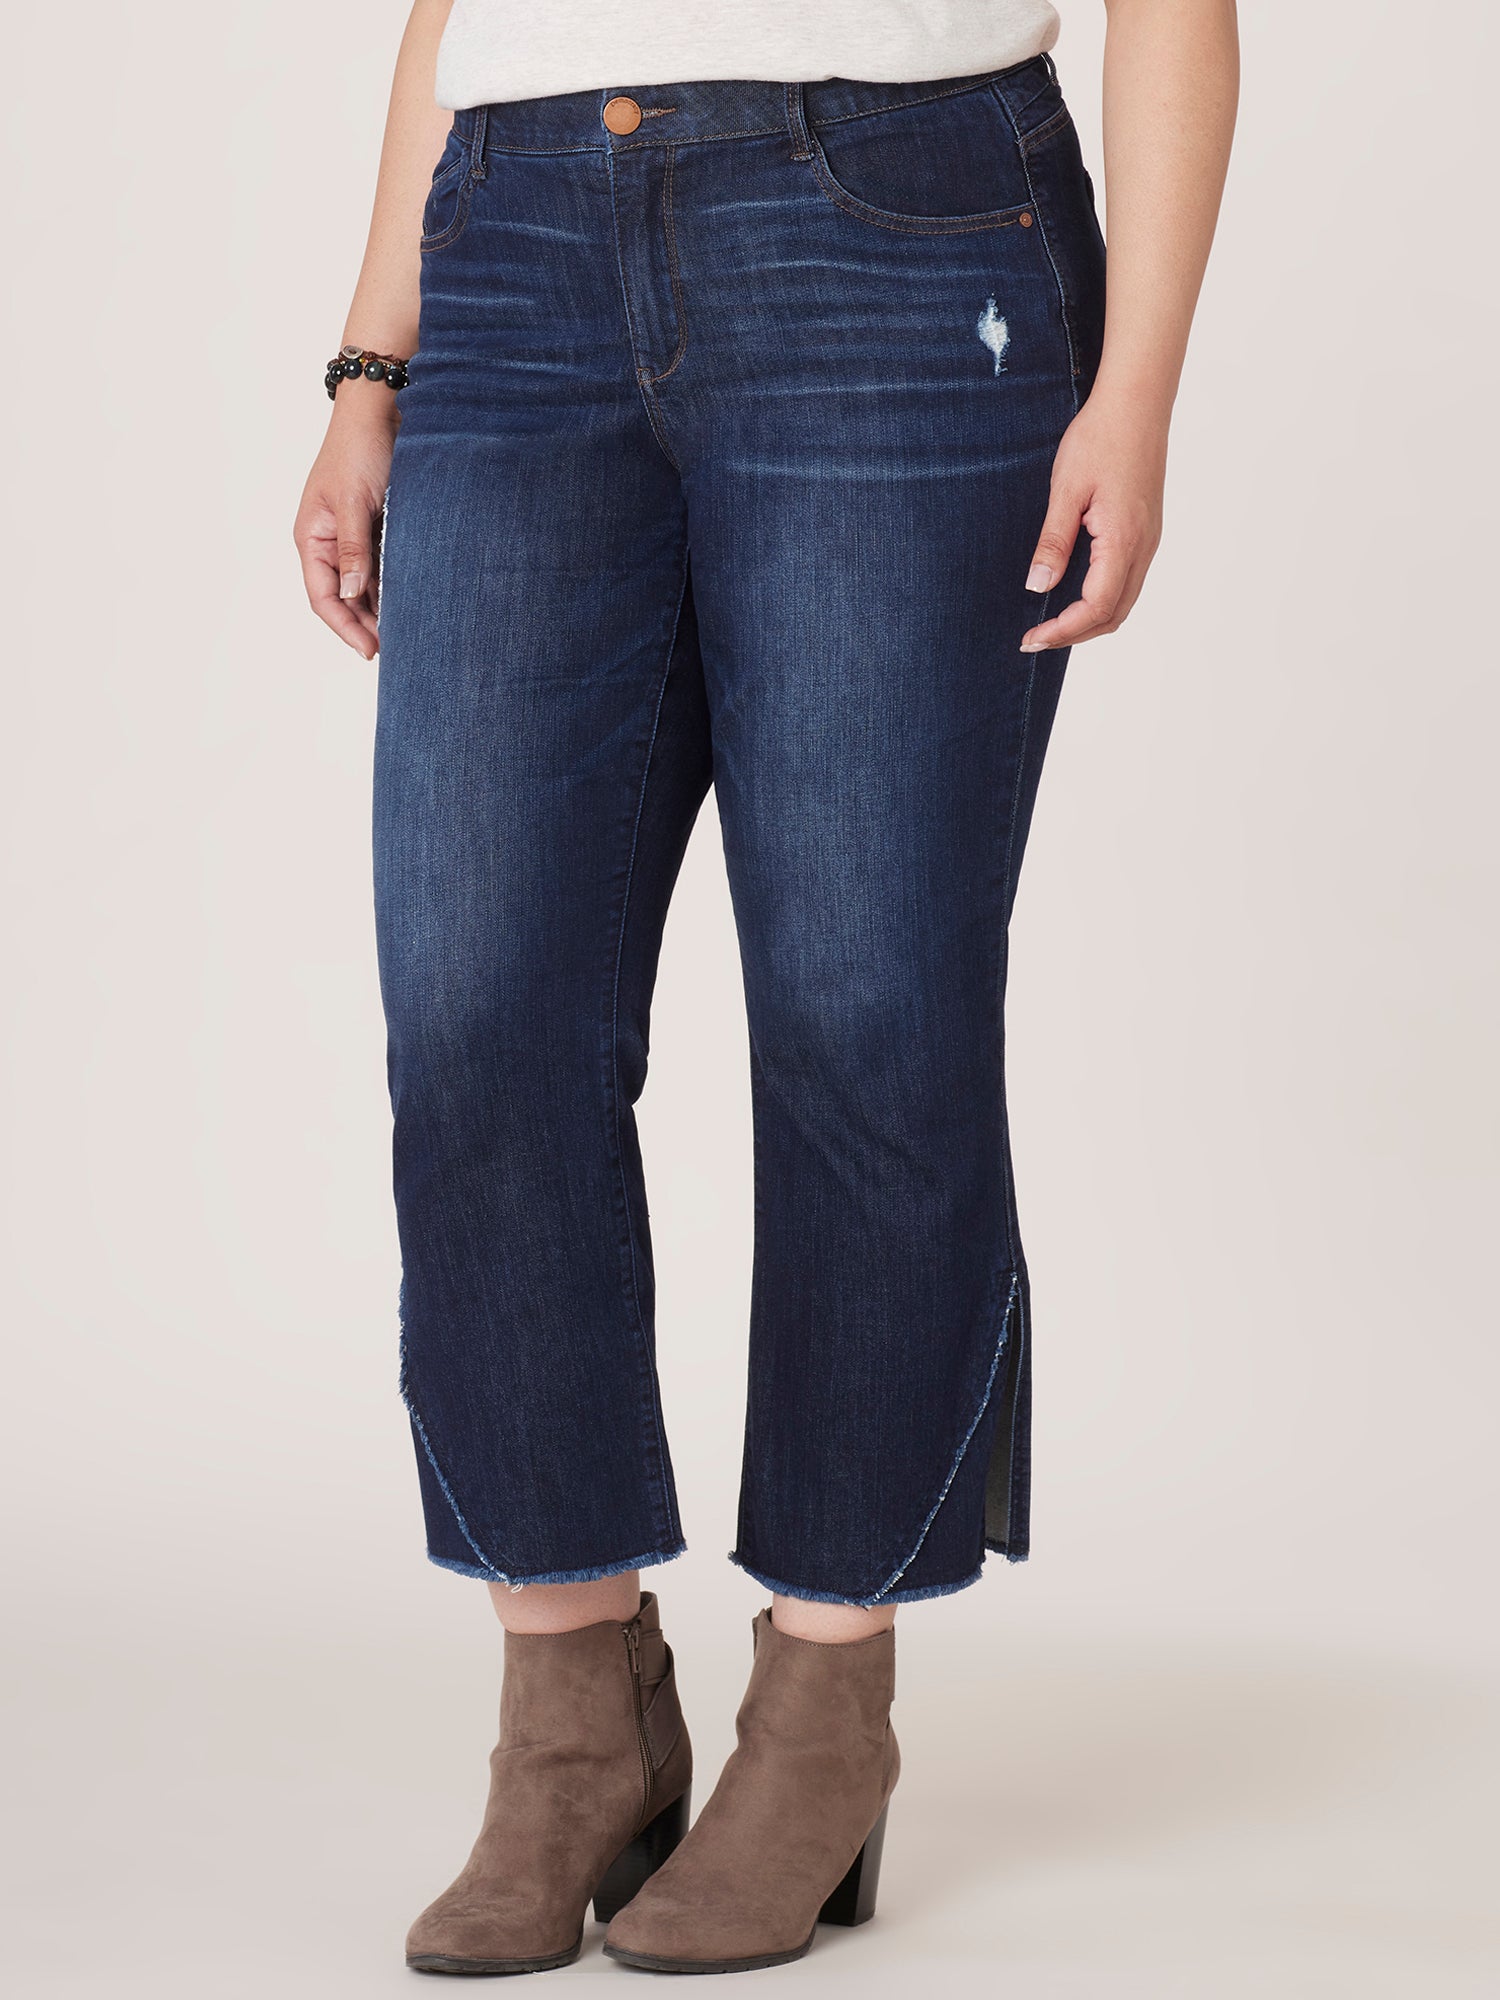 kensie Jeans for Women High-Rise Patch Pocket Flare 32-Inch Inseam